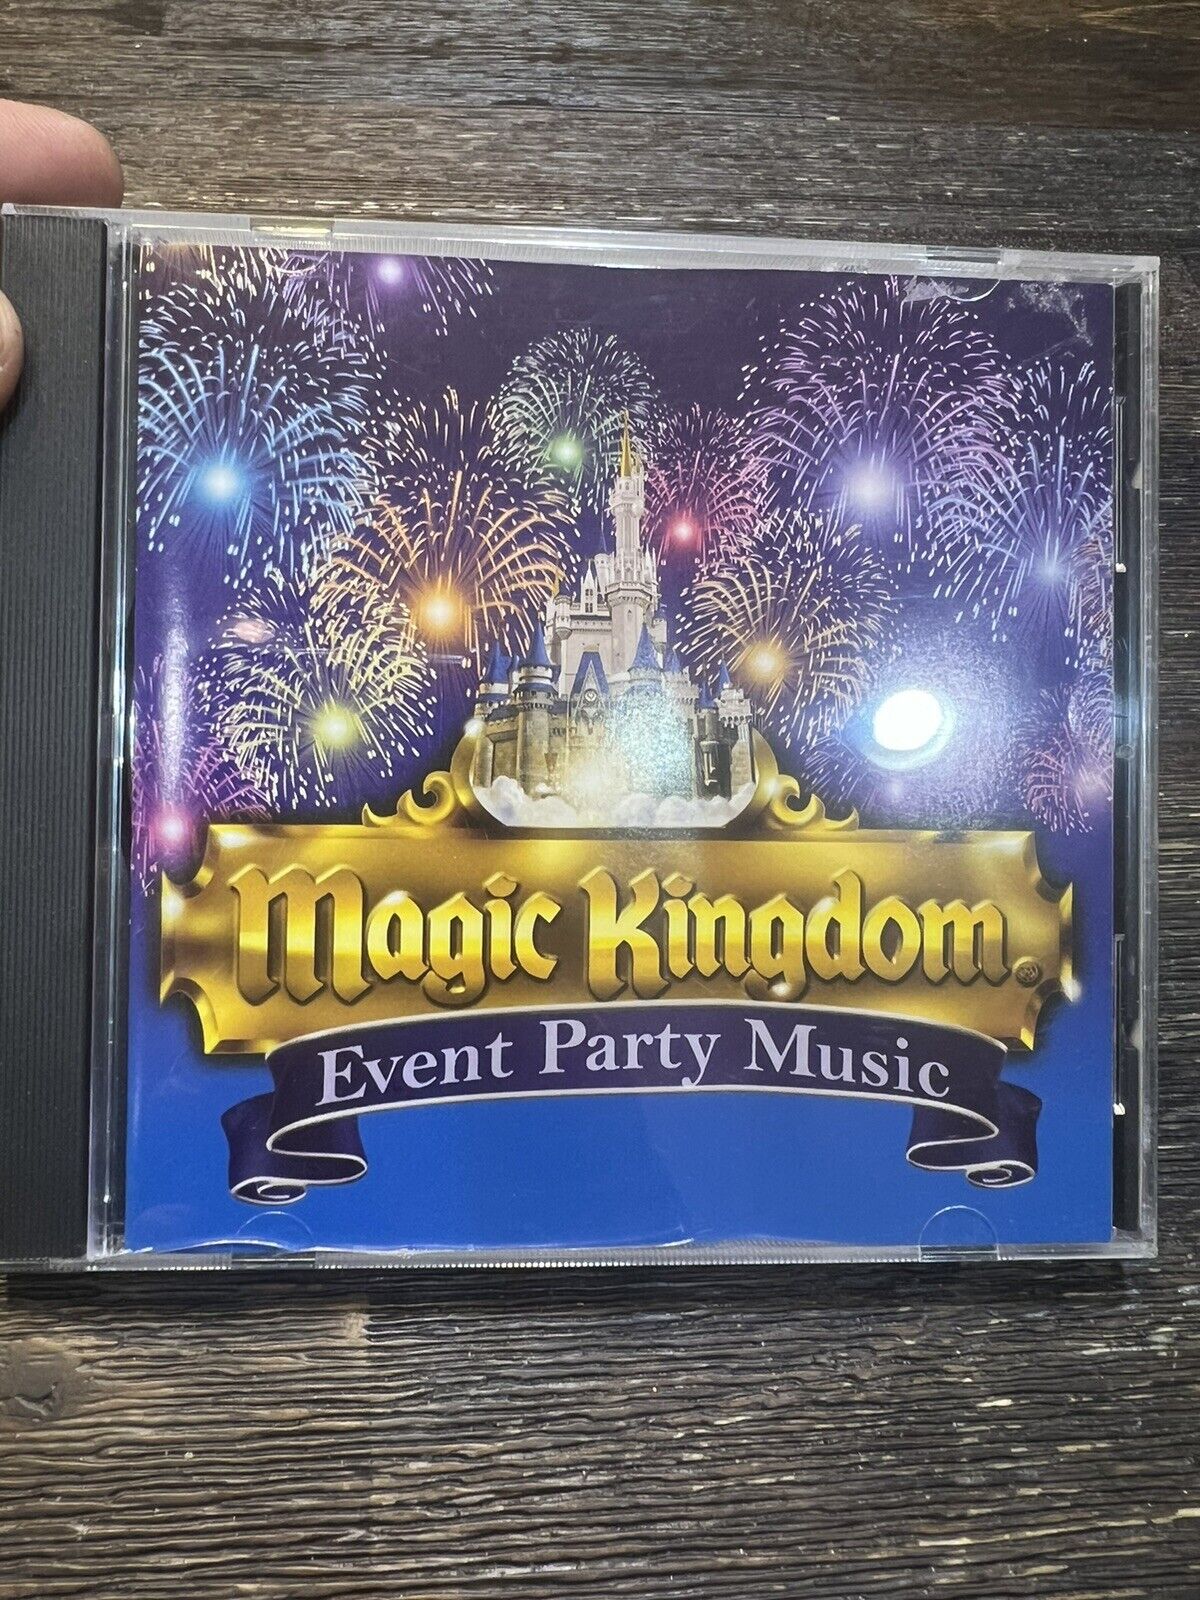 Disney CD MAGIC KINGDOM EVENT PARTY MUSIC 27 Song Tracks 2007 WDW Park Exclusive